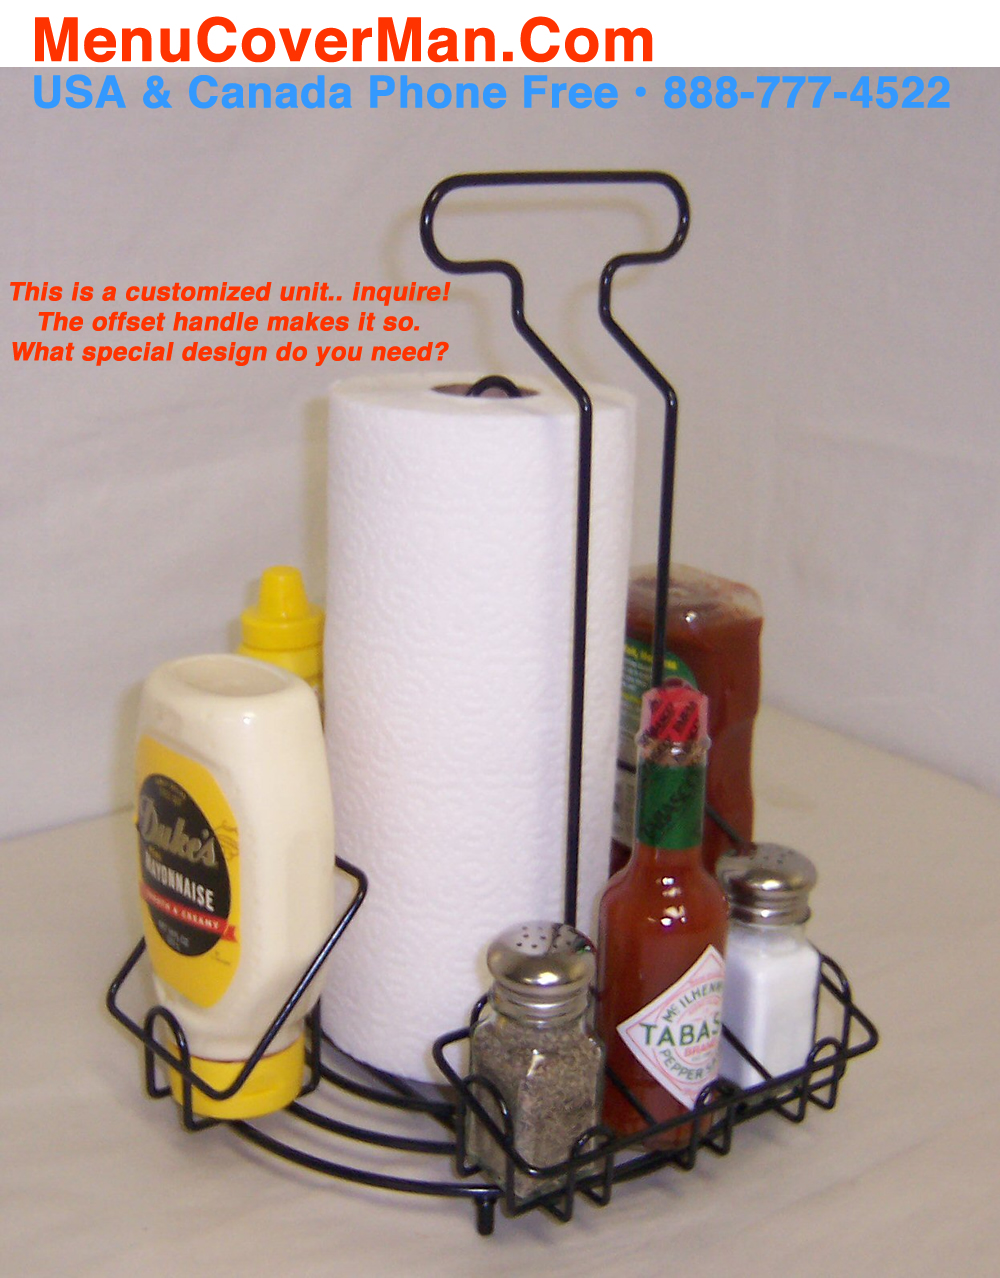 Customized wire condiment holder with offset handle.